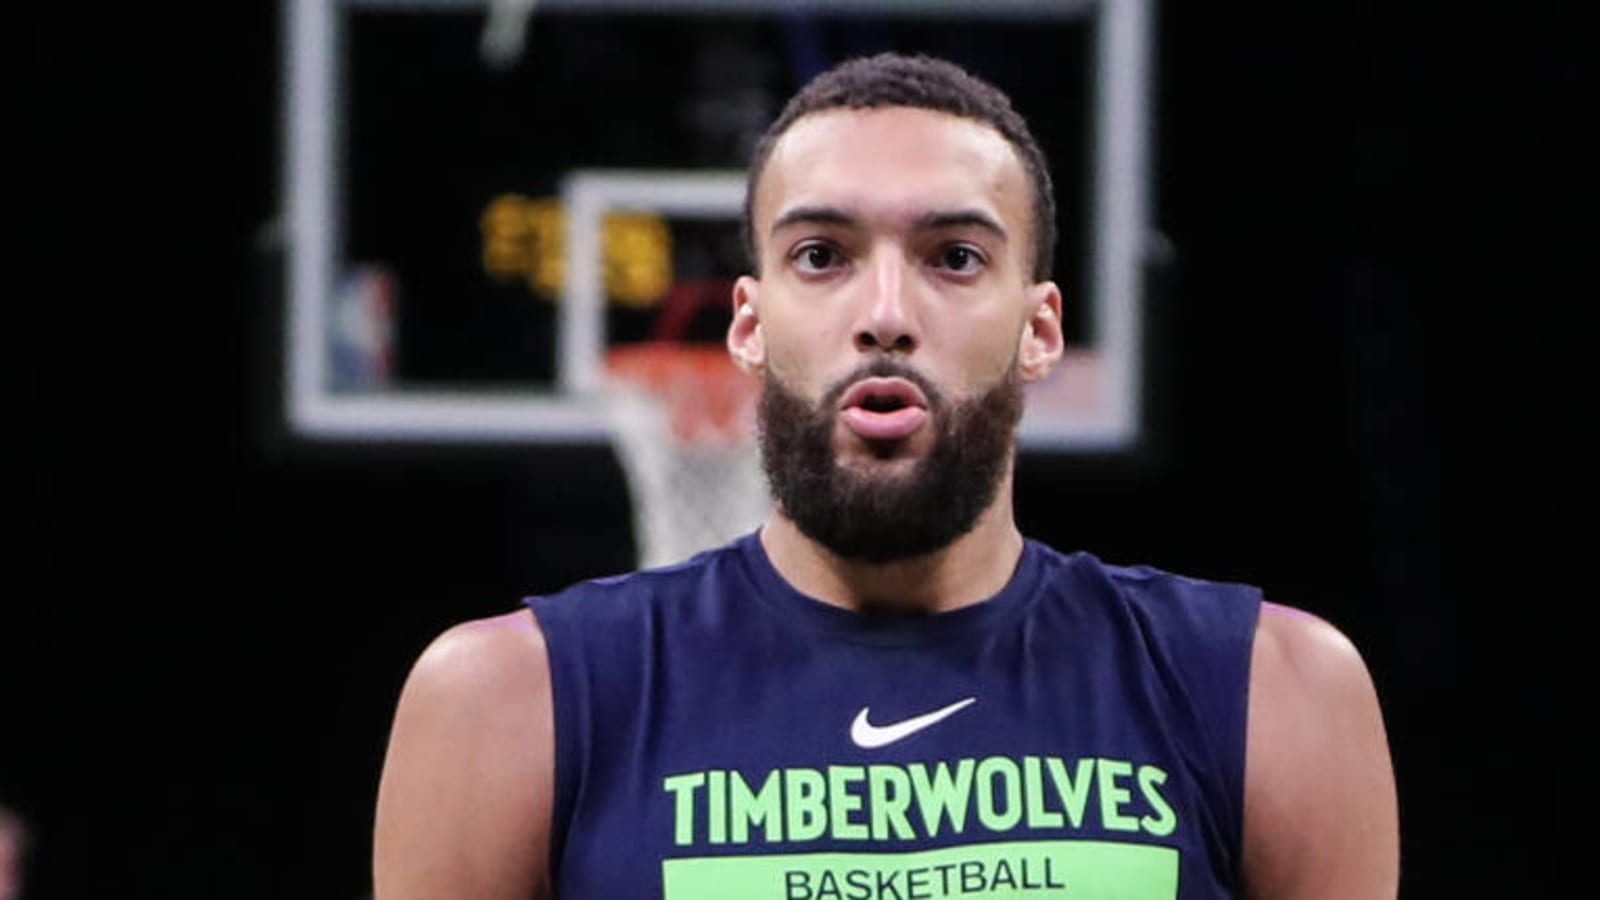 Watch: T-wolves' Gobert punches teammate during timeout